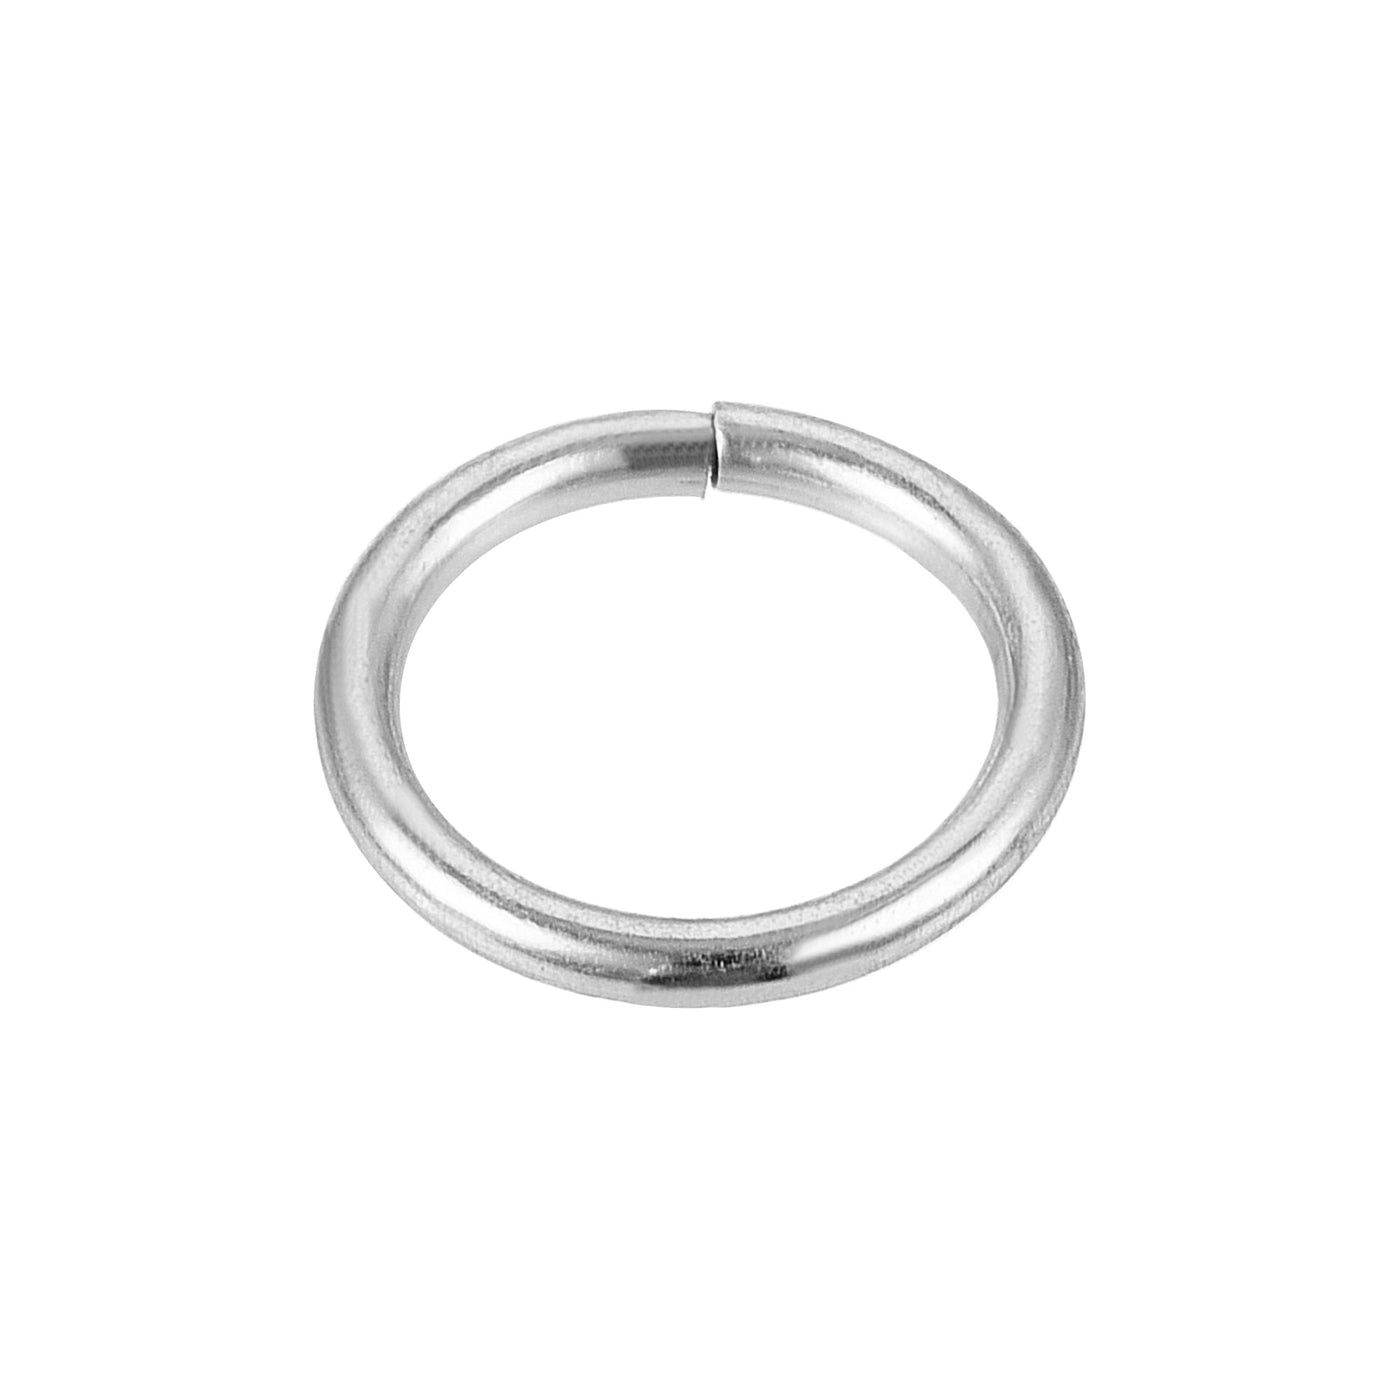 uxcell Uxcell 8mm Metal O Rings Non-Welded for Straps Bags Belts DIY Silver Tone 30pcs